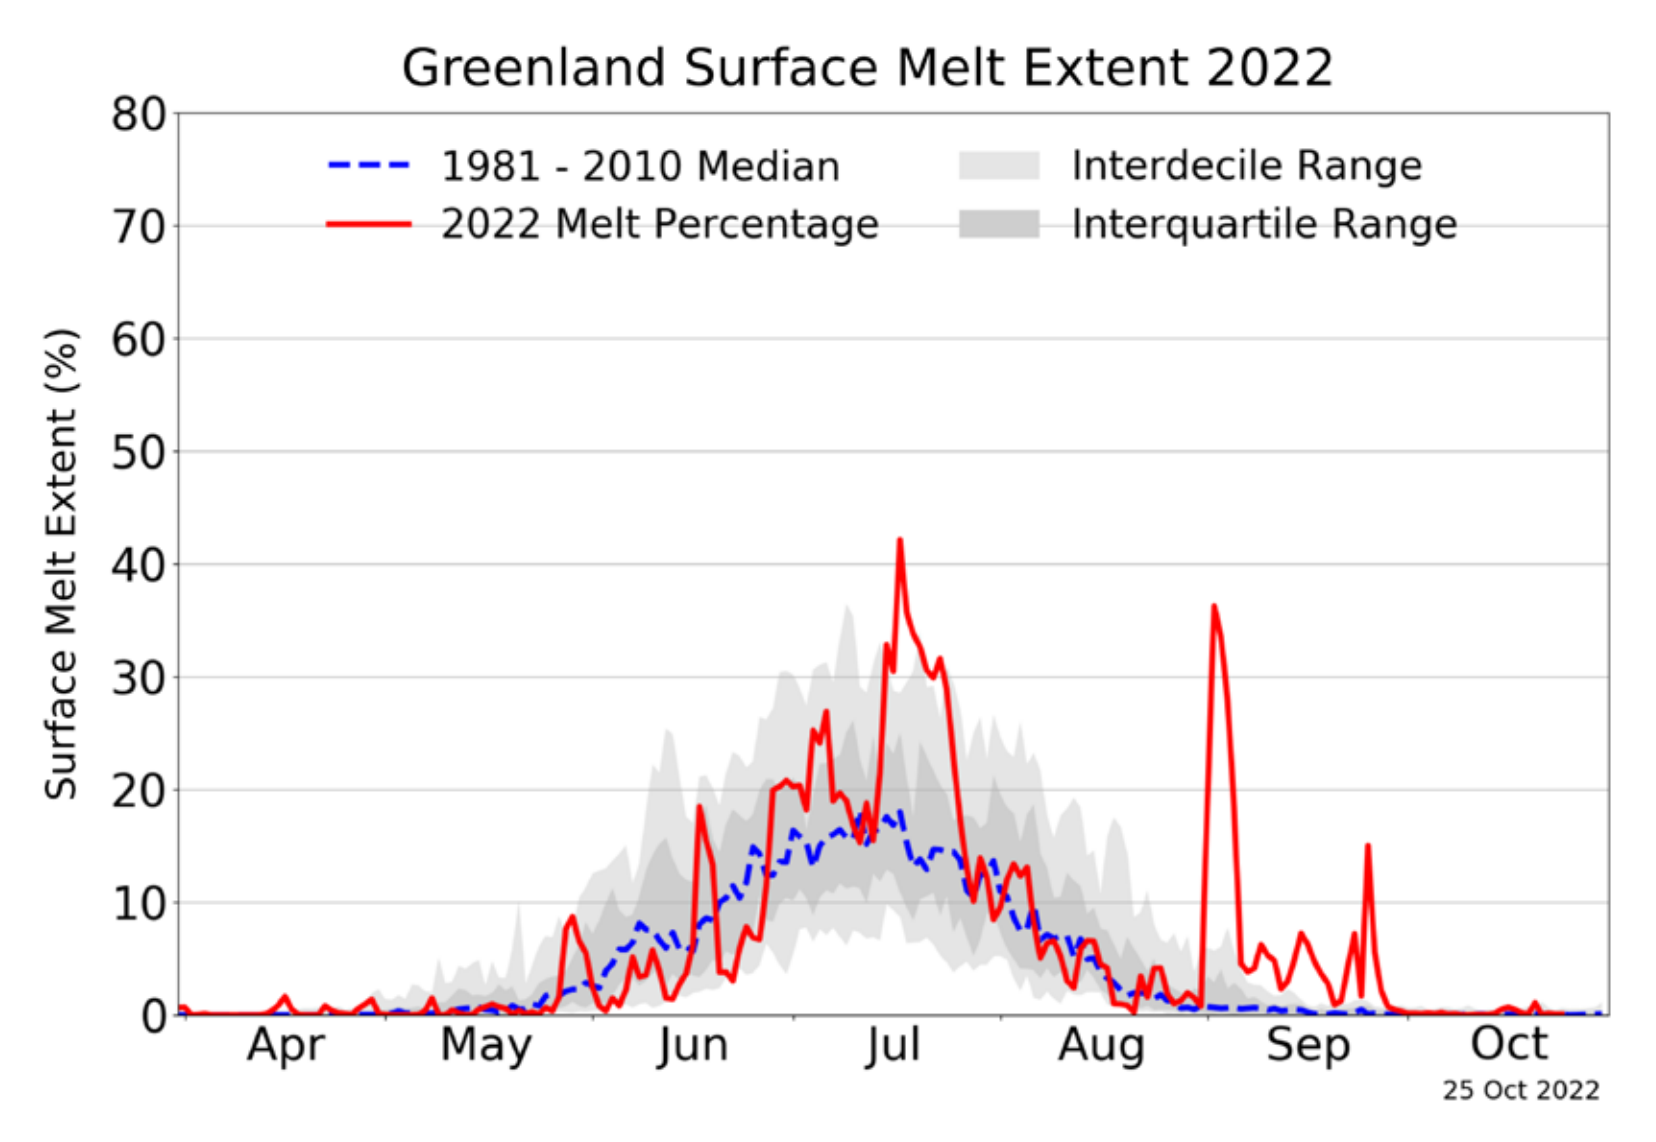 Greenland Ice Sheet melt extent, 2022. For Greenland, the estimated total mass balance was -85 Gt representing a net ice loss during the 2022 mass balance year (1 September 2021 – 31 August 2022). This year, the Greenland ice sheet ended with a surface mass balance of about 423 Gt, which is the 10th highest value in the dataset that goes back 1980. Nevertheless, the Greenland Ice Sheet ended with a negative total mass balance for the 26th year in a row, mainly due to the strong negative marine mass balance of -486 Gt. The melting and ablation seasons in Greenland began late in 2022 and the summer was relatively cool compared with recent years. However, there was a period of high temperatures at the end of July 2022 with intense surface melt over large parts of the ice sheet and large ice losses over a few days. September 2022 was also extraordinarily warm, with widespread and generally high positive temperature anomalies along with widespread melting early in the month. Summit Station, the highest point in Greenland (3,200 m), had its warmest September on record (since 1991) and experienced melting conditions on 3 September 2022, the first time melting has been registered at this site in September. Later in September, heavy rain associated with post-tropical cyclone Fiona fell on the ice sheet, also a first for September. Graphic: Thomas Mote / U.S. National Snow and Ice Data Center